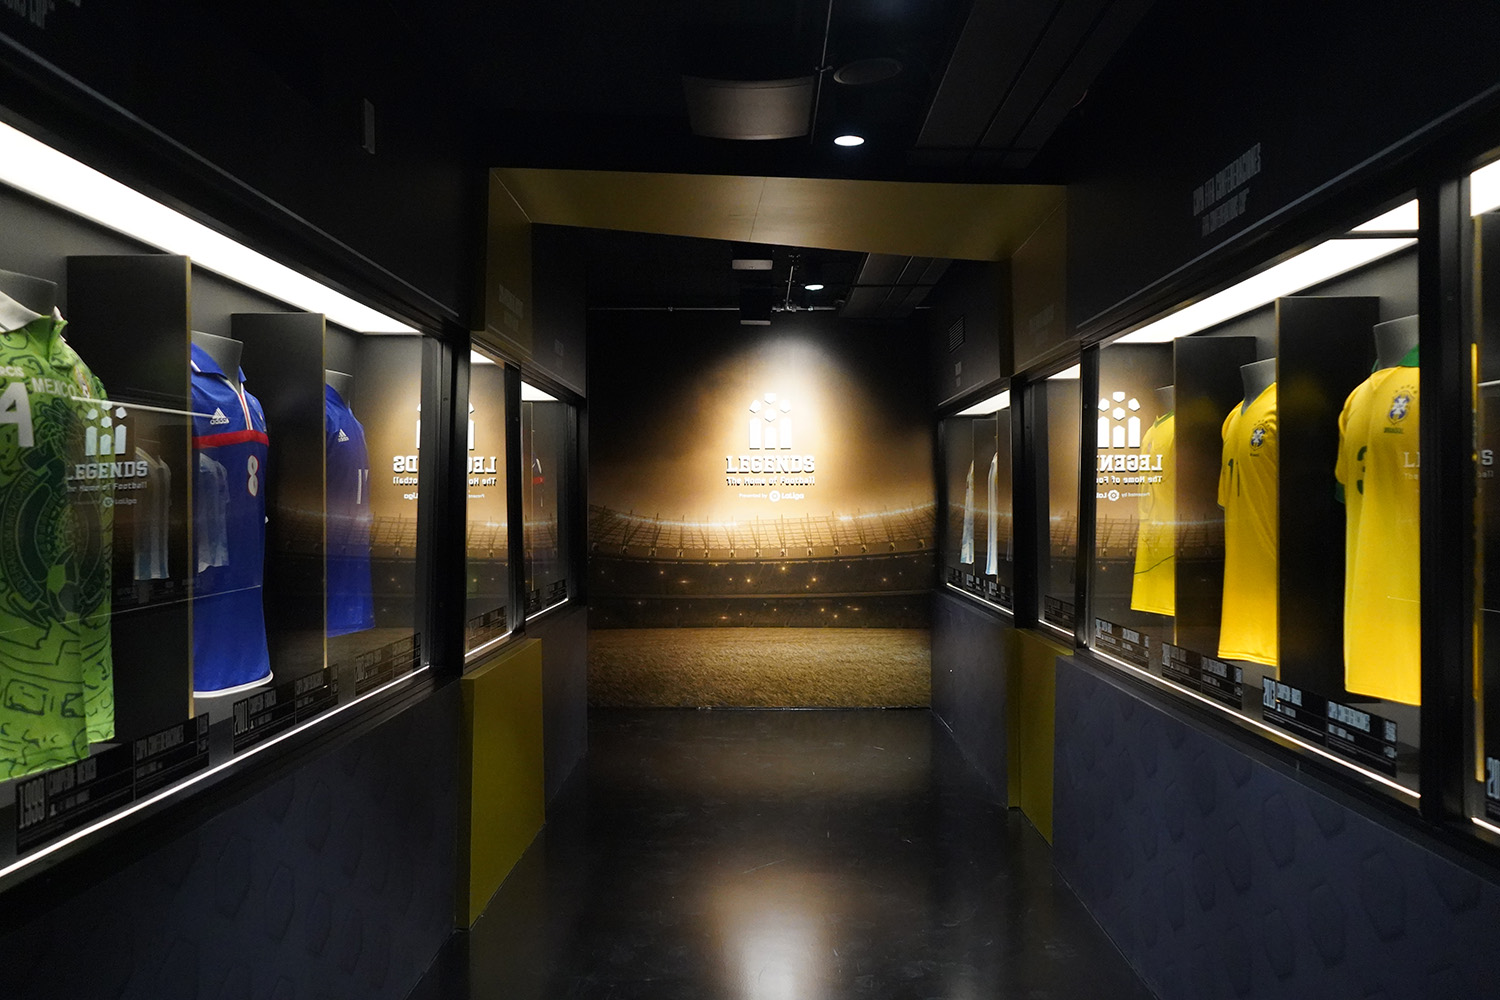 LEGENDS is the only complete collection of historical football pieces.